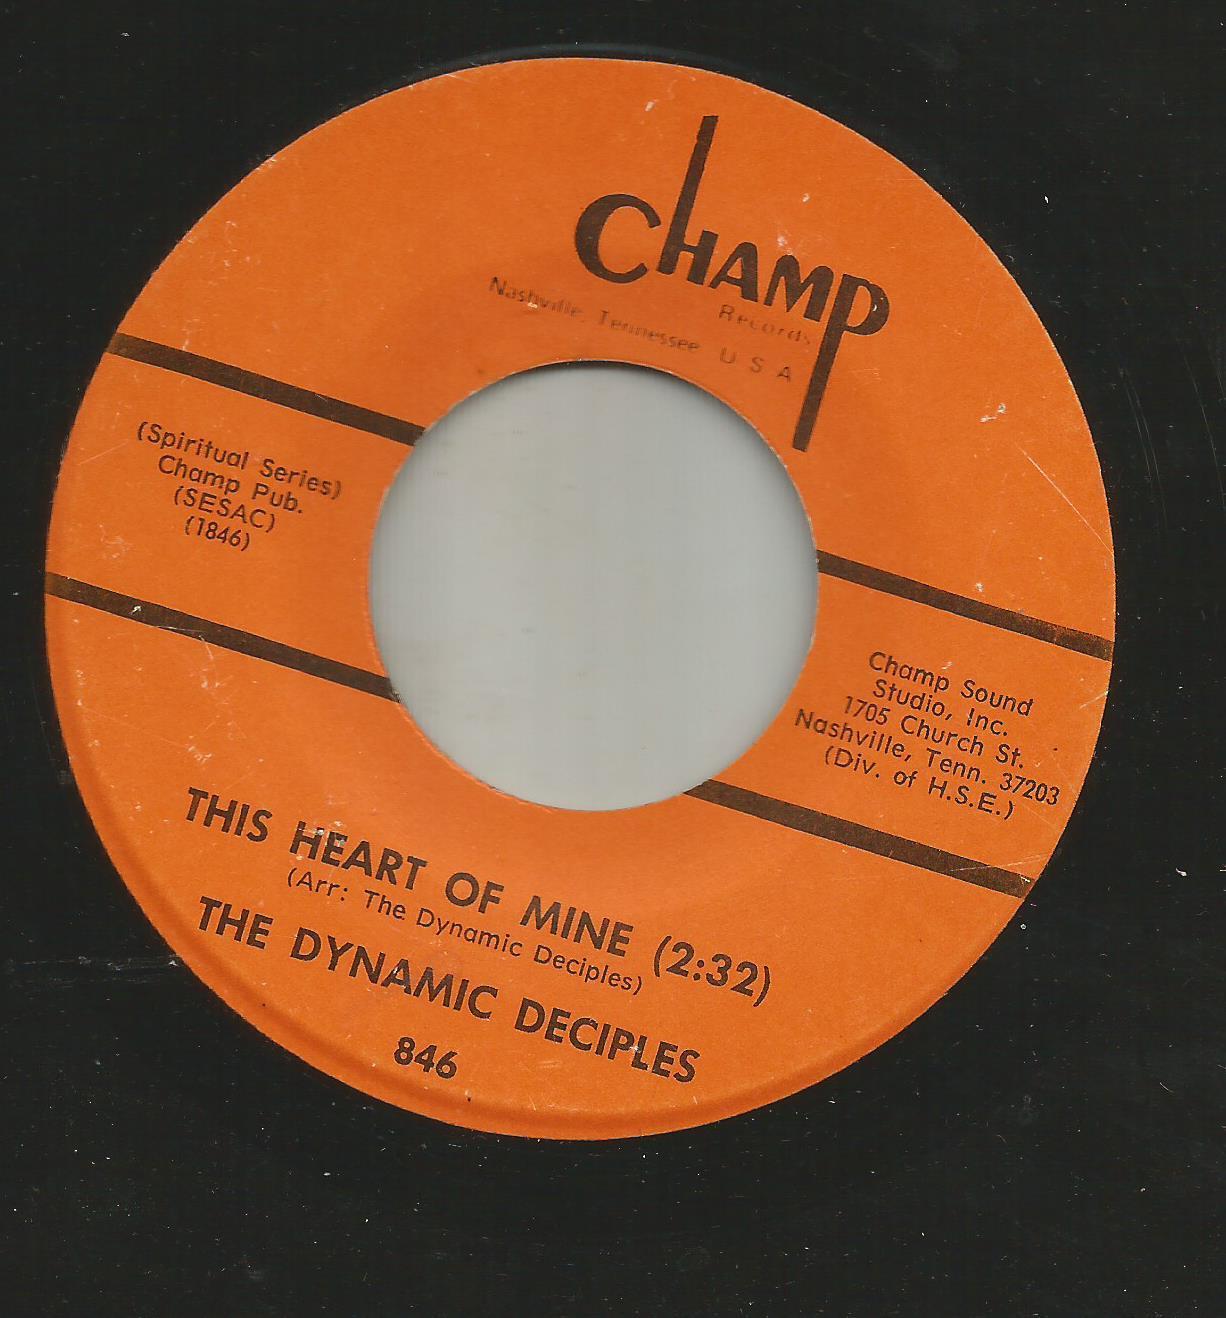 NORTHERN SOUL GOSPEL- DYNAMIC DECIPLES- THIS HEART OF MINE  -HEAR BOTH -on CHAMP